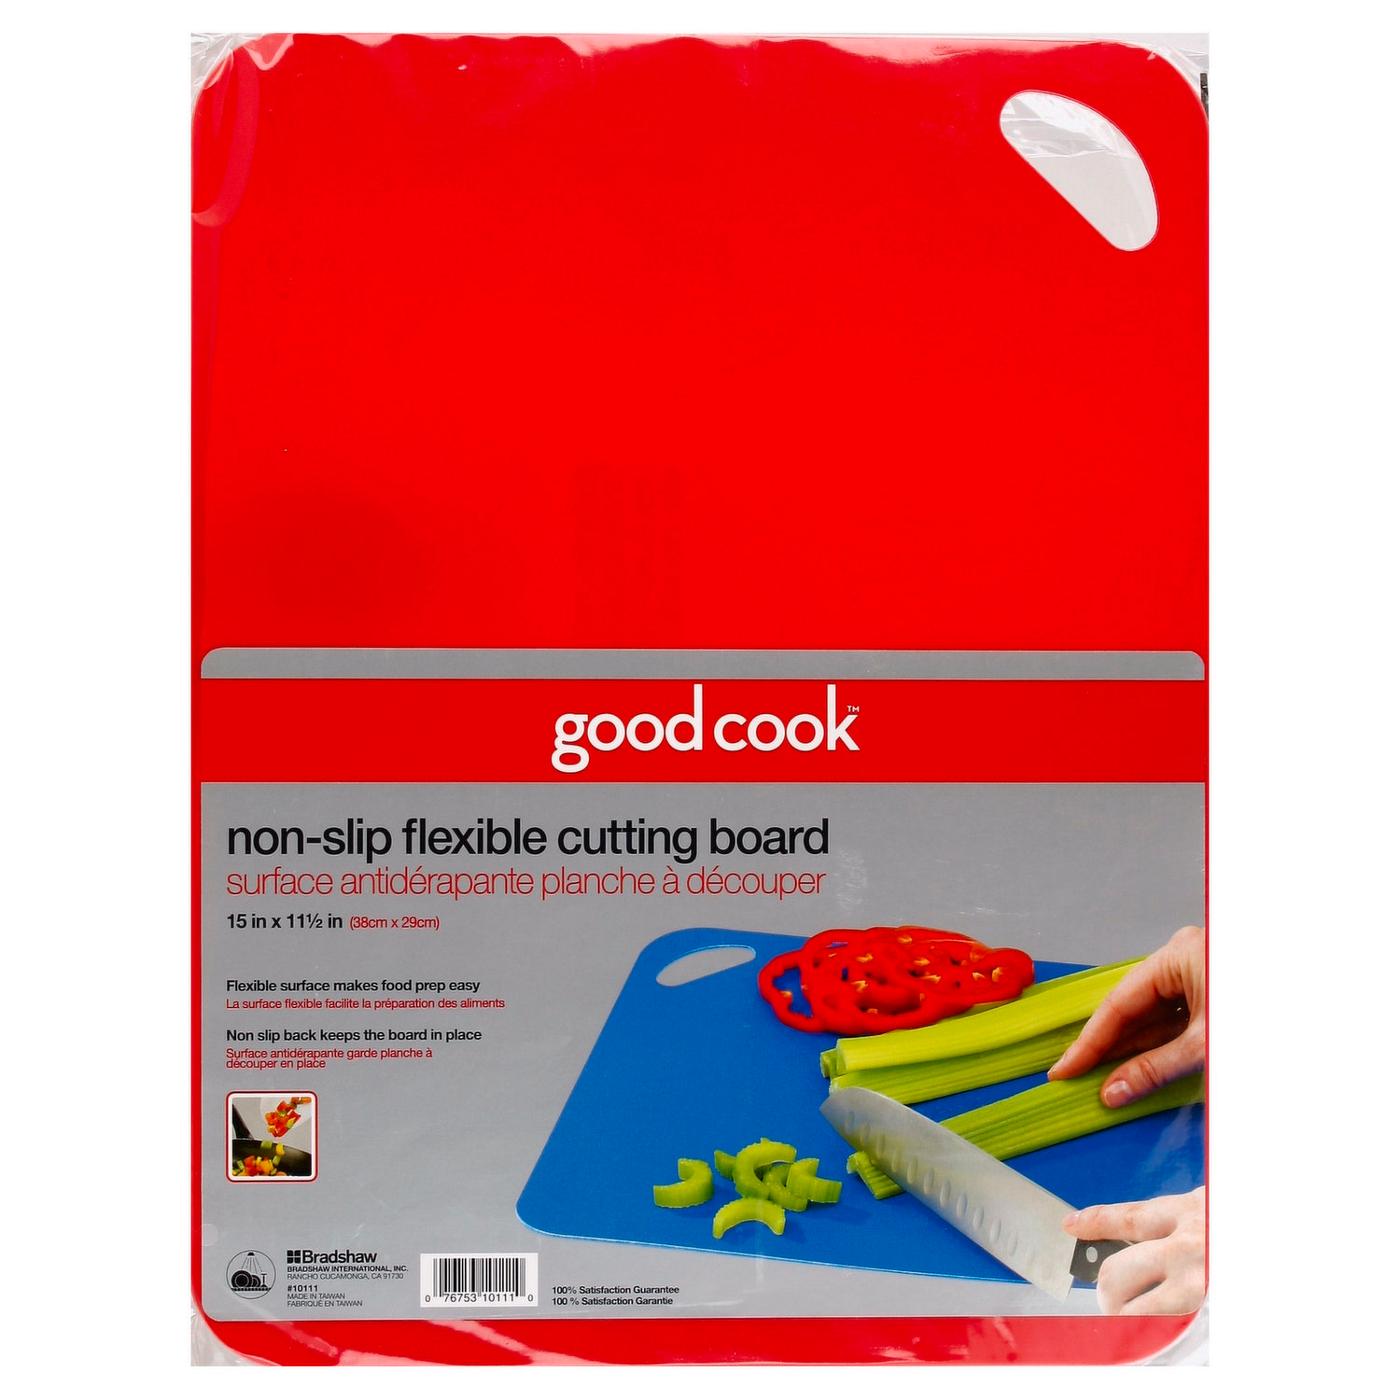 GoodCook Non-Slip Flexible Cutting Board - Assorted Colors; image 3 of 3